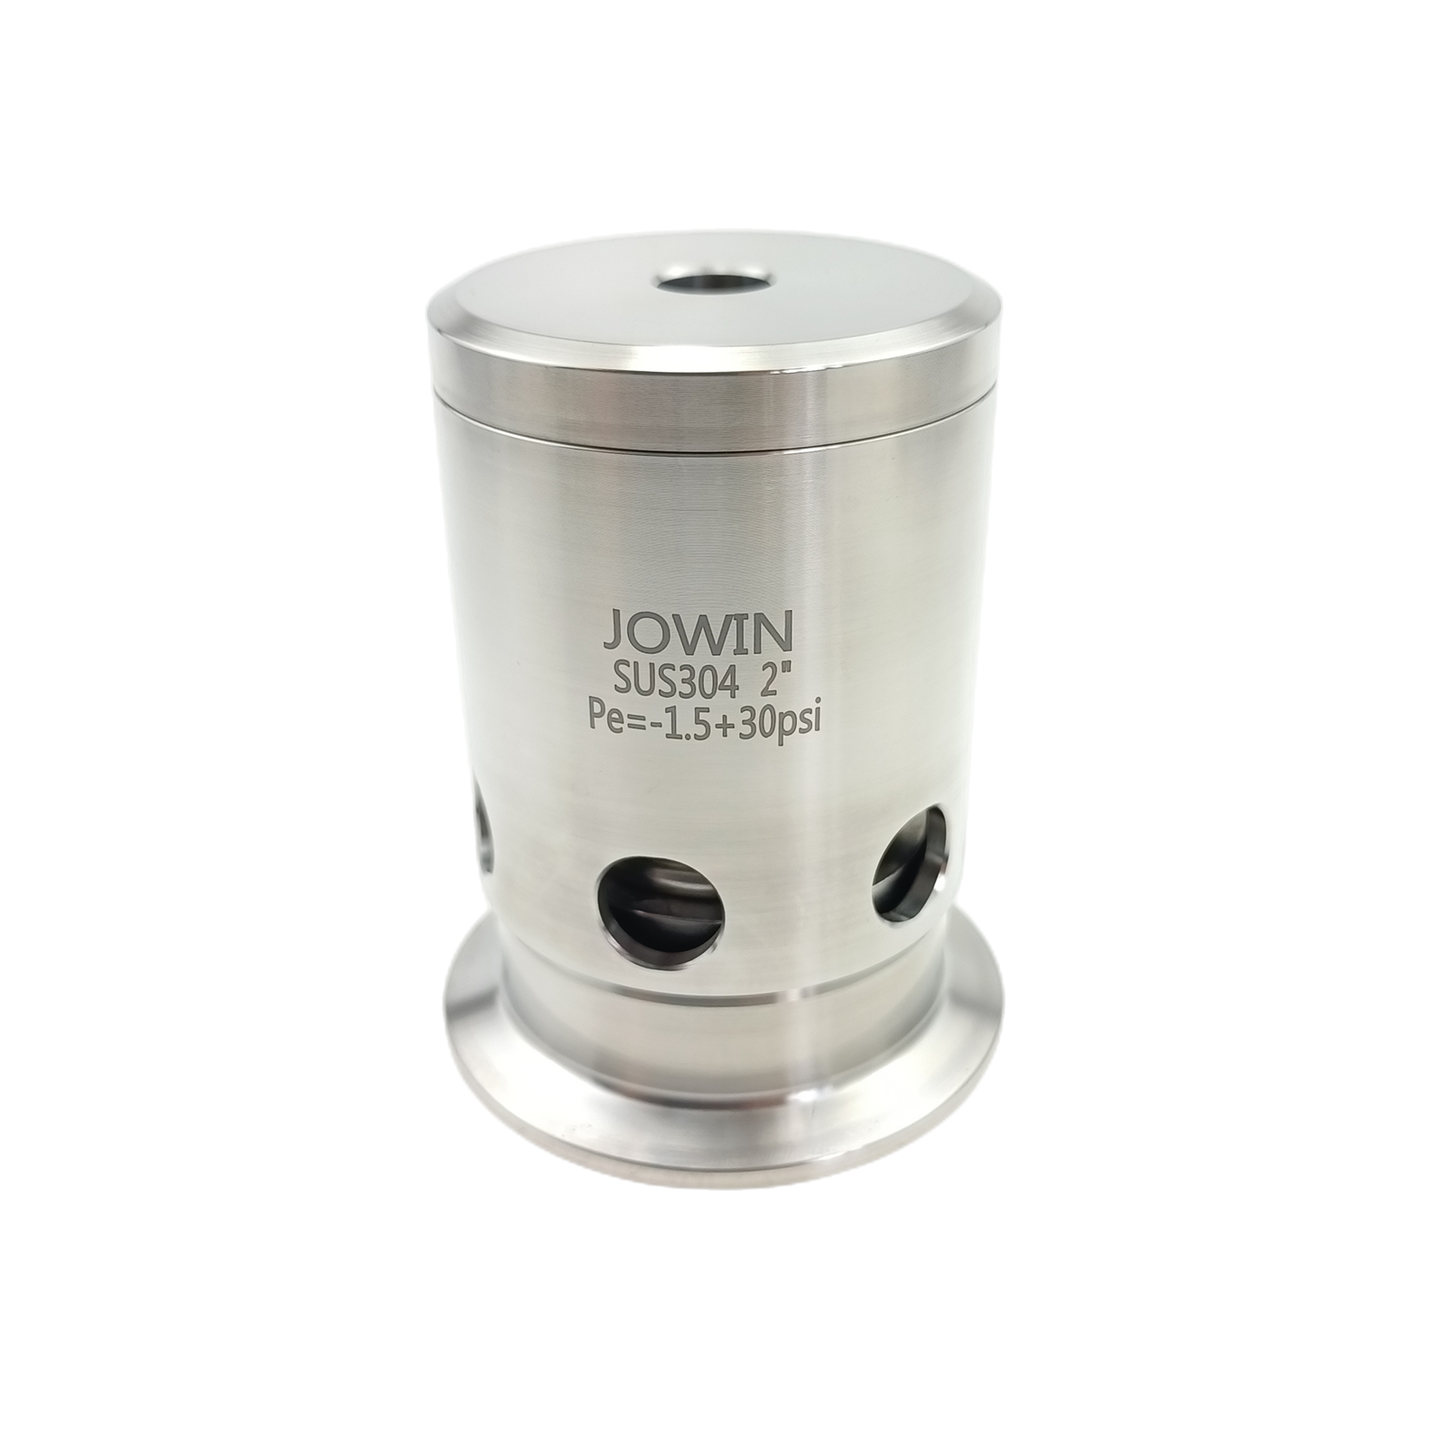 JOWIN 2" Tri Clamp PRV 15 or 30 PSI Pressure Relief Valve and Vacuum Breaker Stainless Steel 304